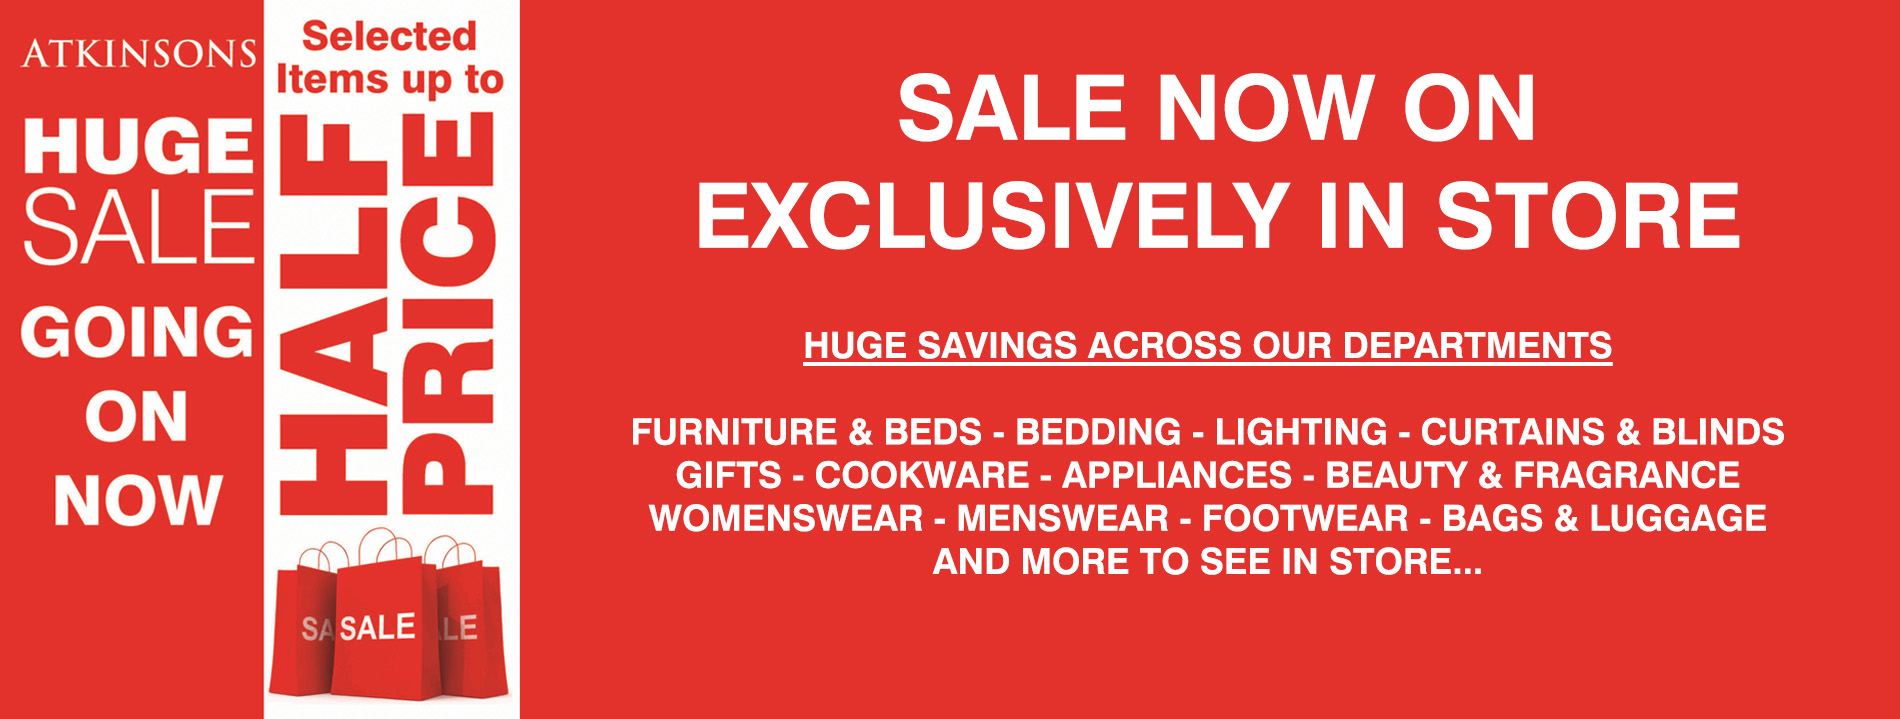 HUGE Sale Going On Now Atkinsons Sheffield